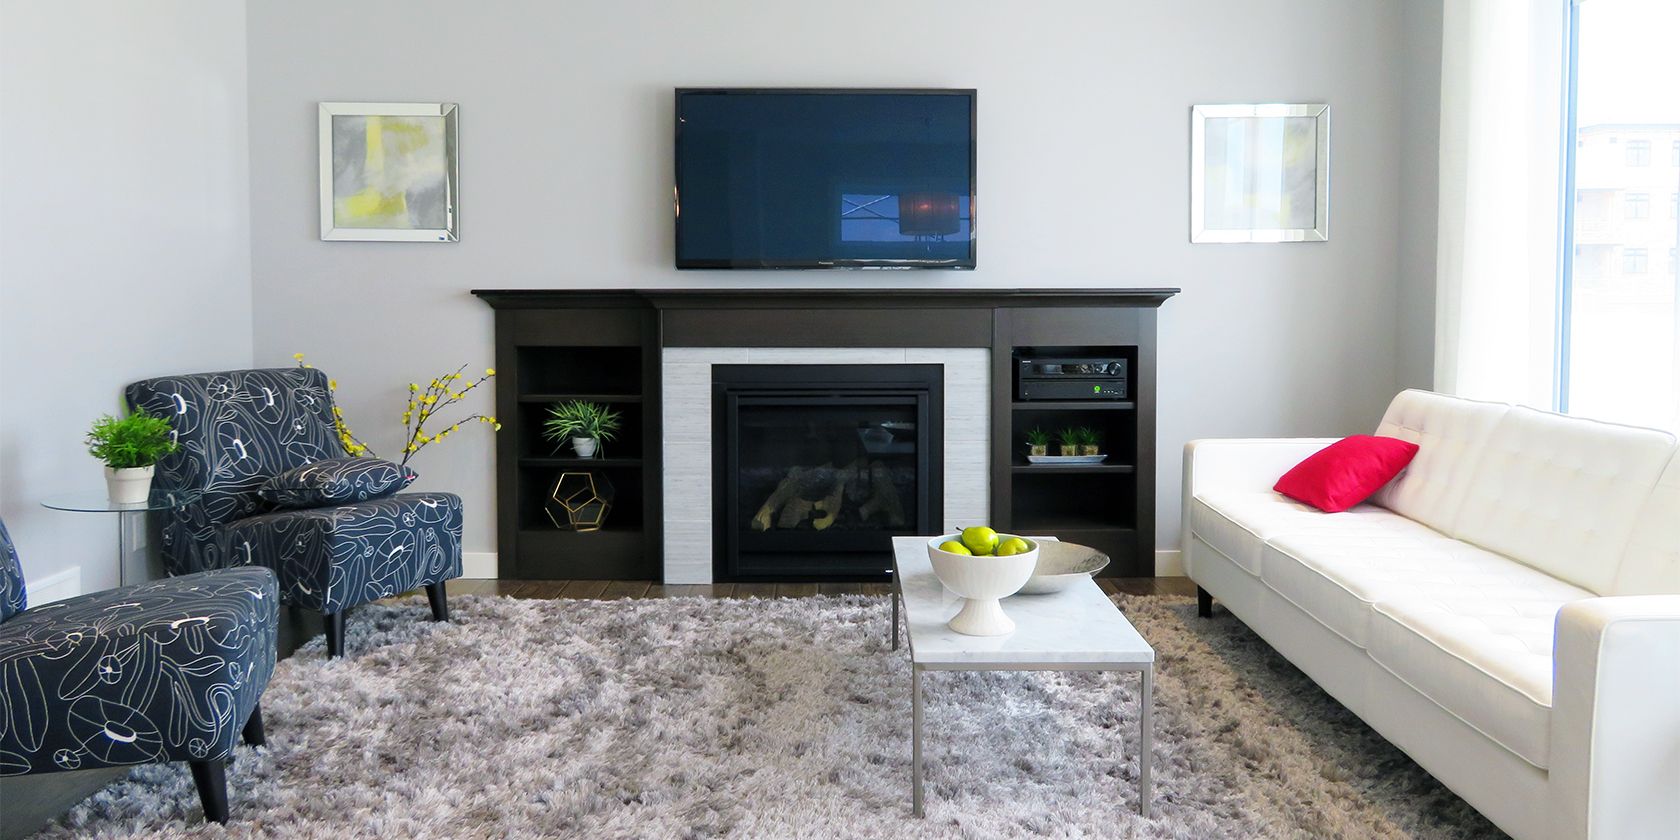 A TV placed above a fireplace and is too high for comfortable viewing